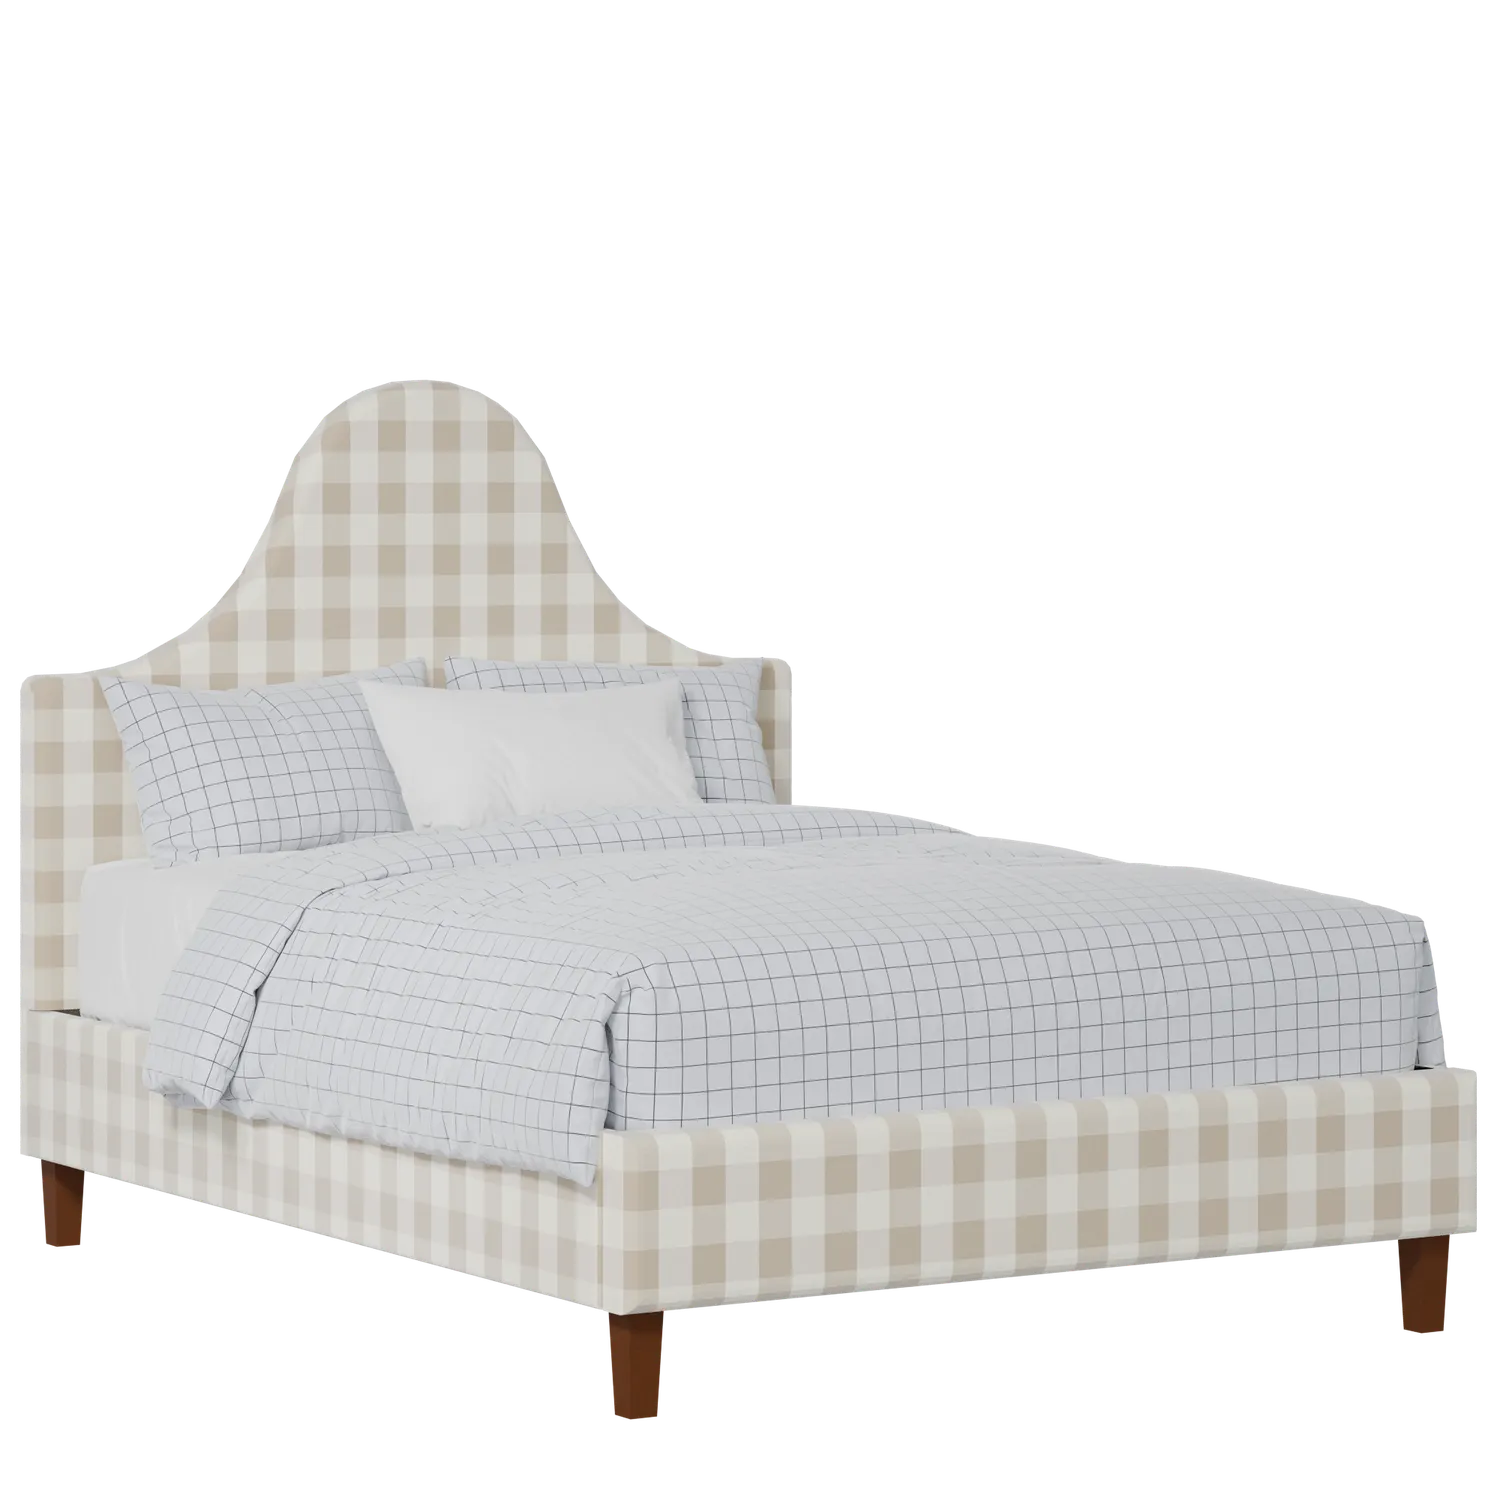 Beverley upholstered bed in Romo Kemble Putty fabric with Juno mattress